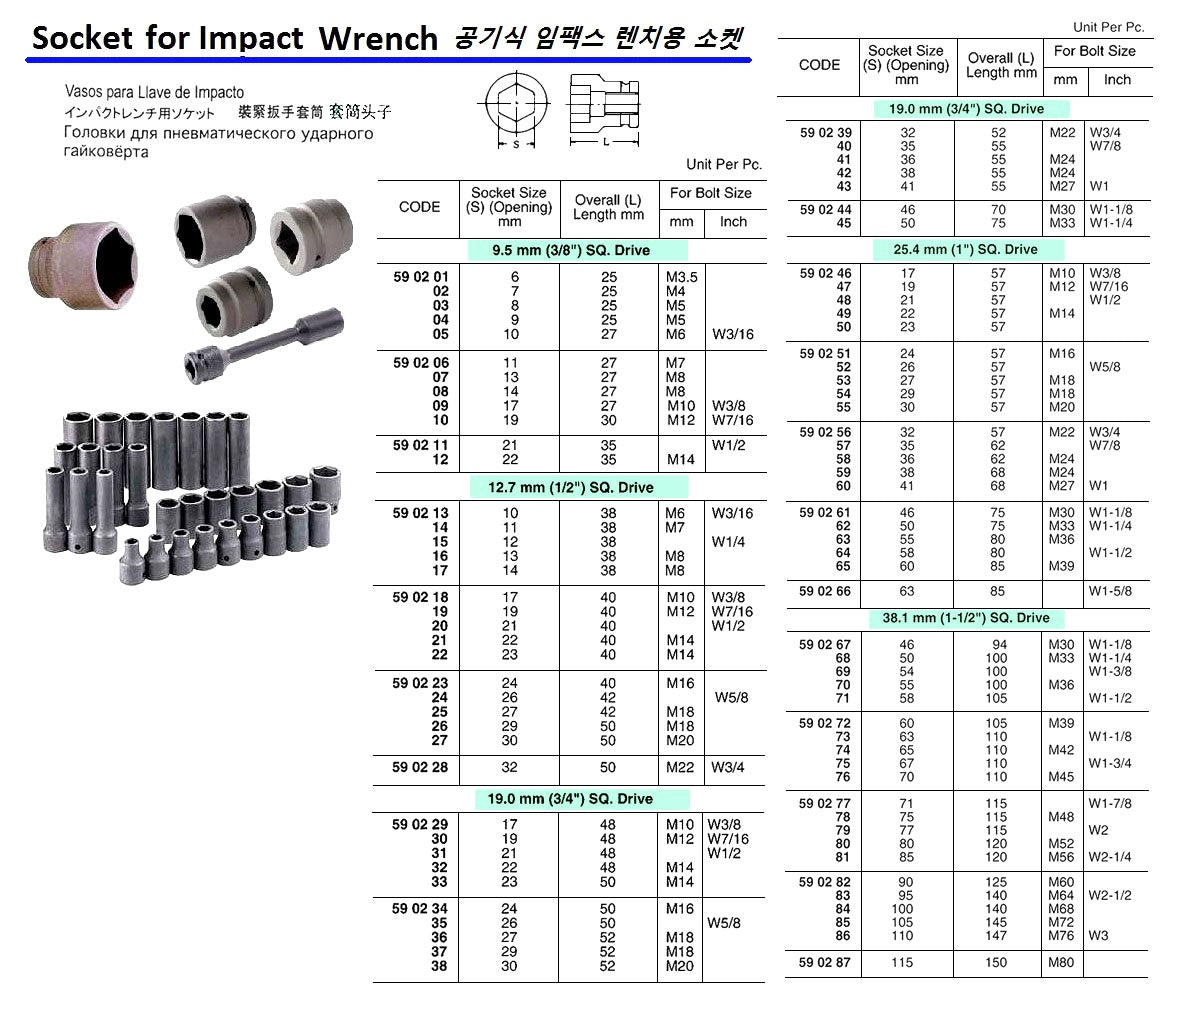 590203-SOCKET FOR IMPACT WRENCH, 9.5MM/SQ DR. X 8MM